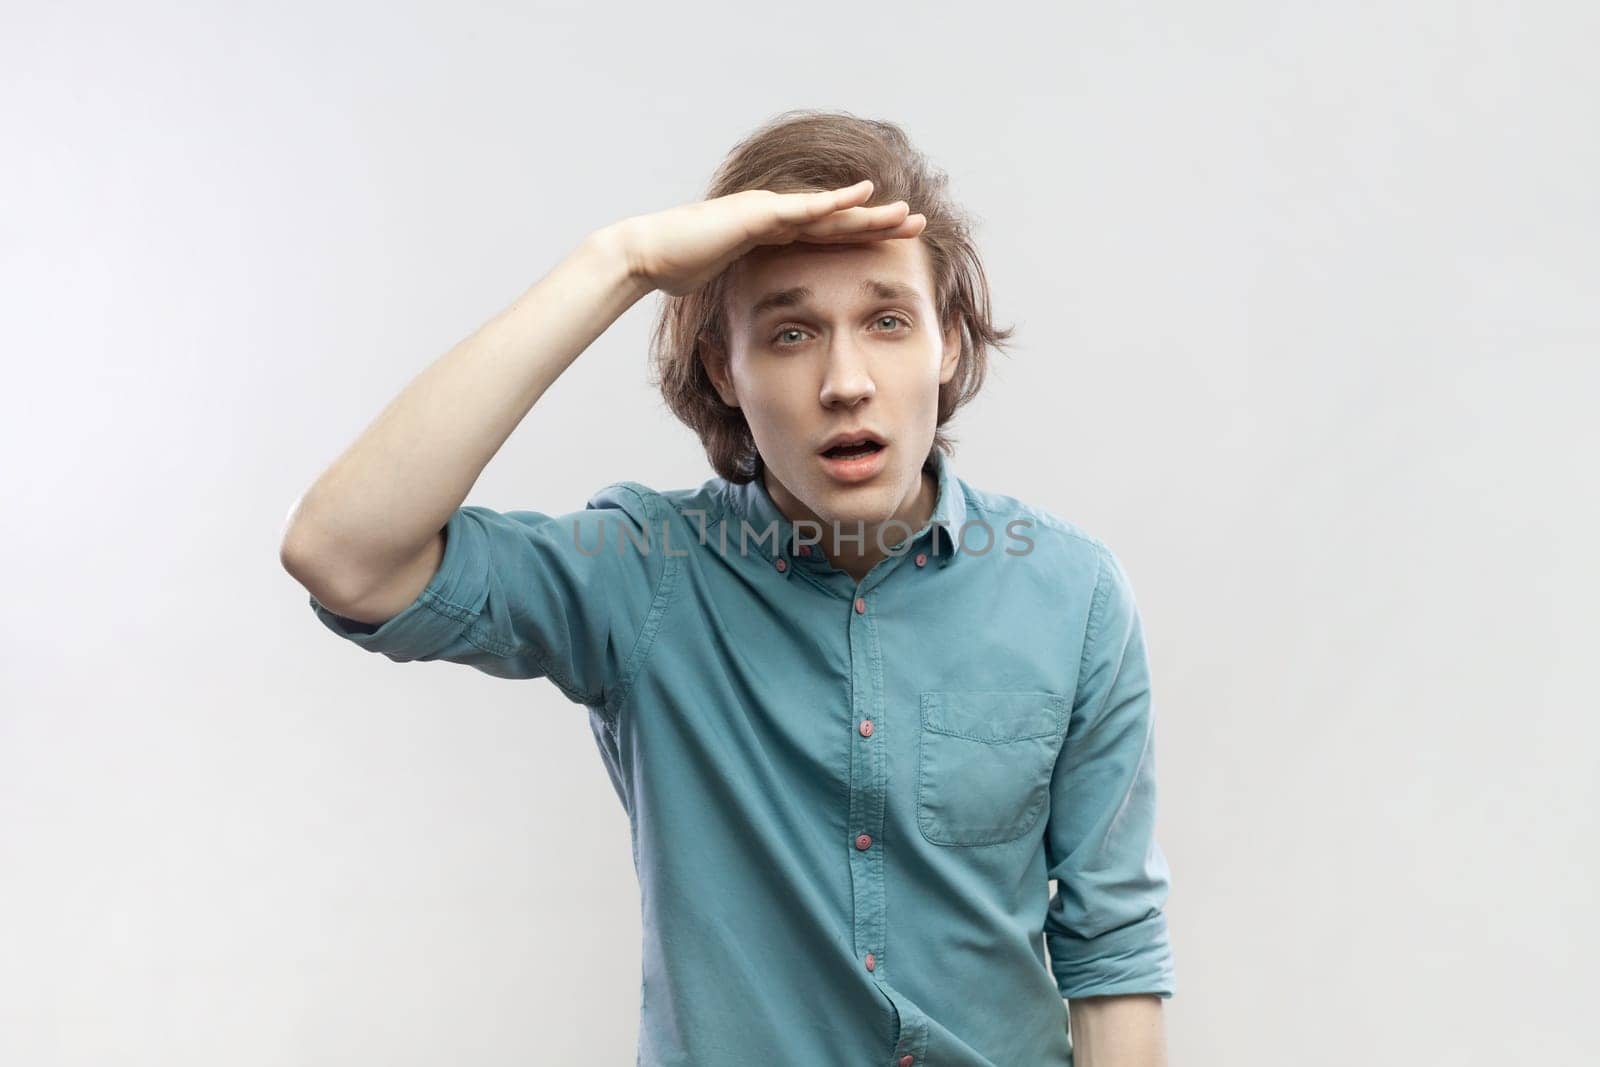 Portrait of concentrated young man looking far away at distance with hand over head, attentively searching for bright future, wearing blue shirt. Indoor studio shot isolated on gray background.